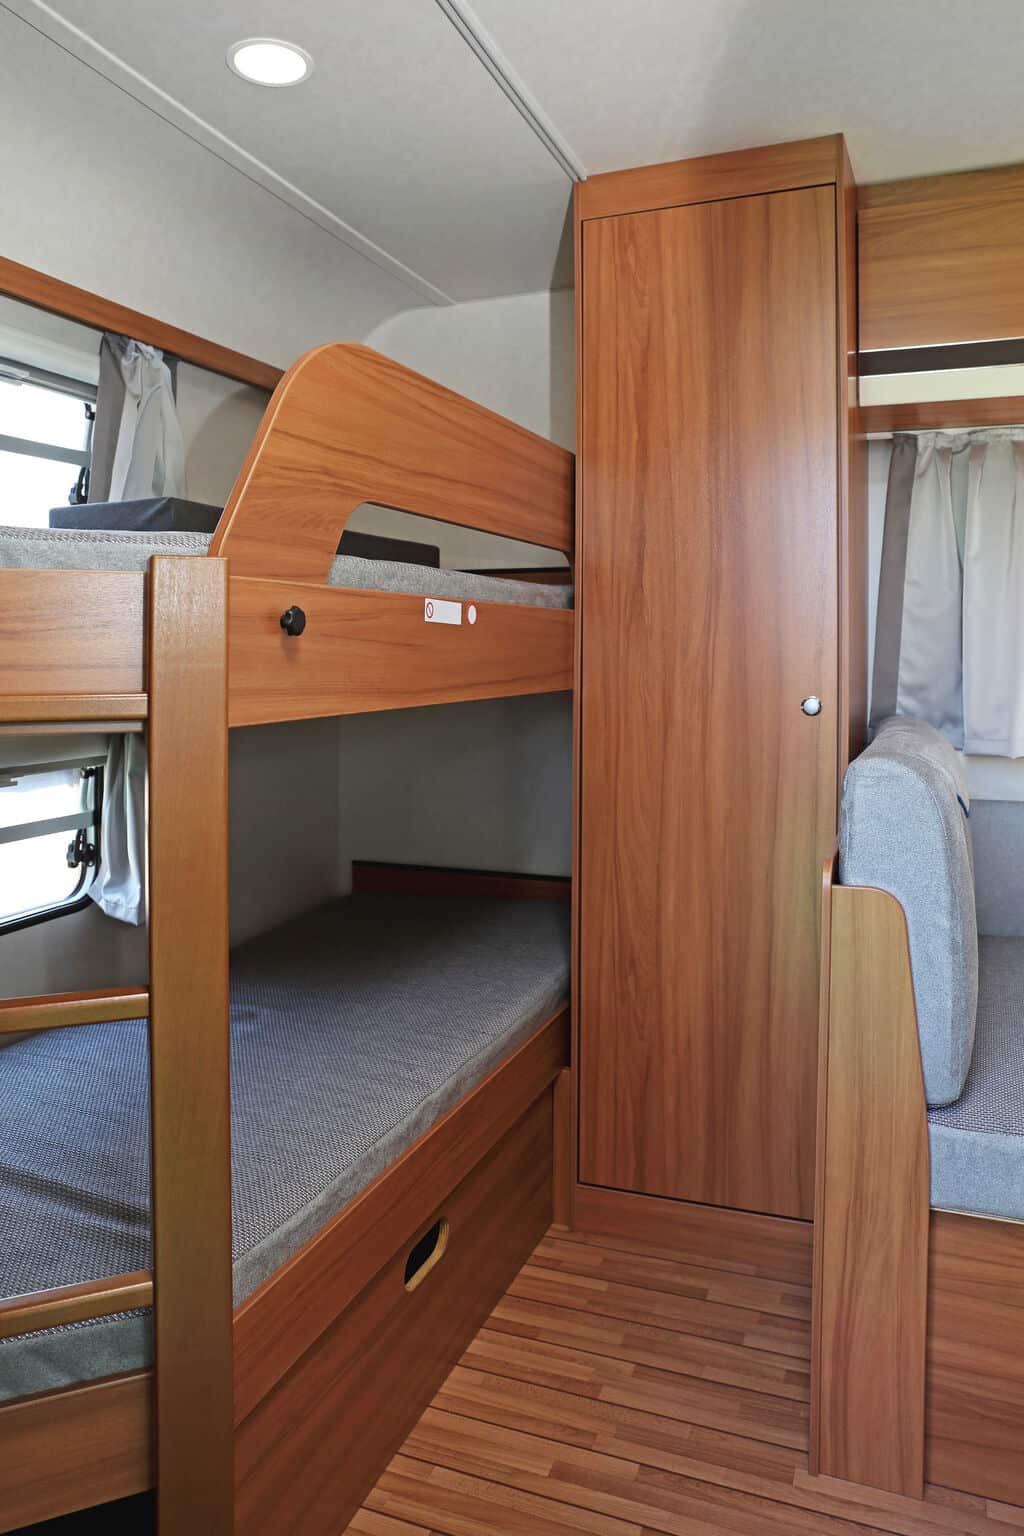 5 Travel Trailers With Quad Bunkhouse, Travel Trailer With Queen Bed And Bunk Beds